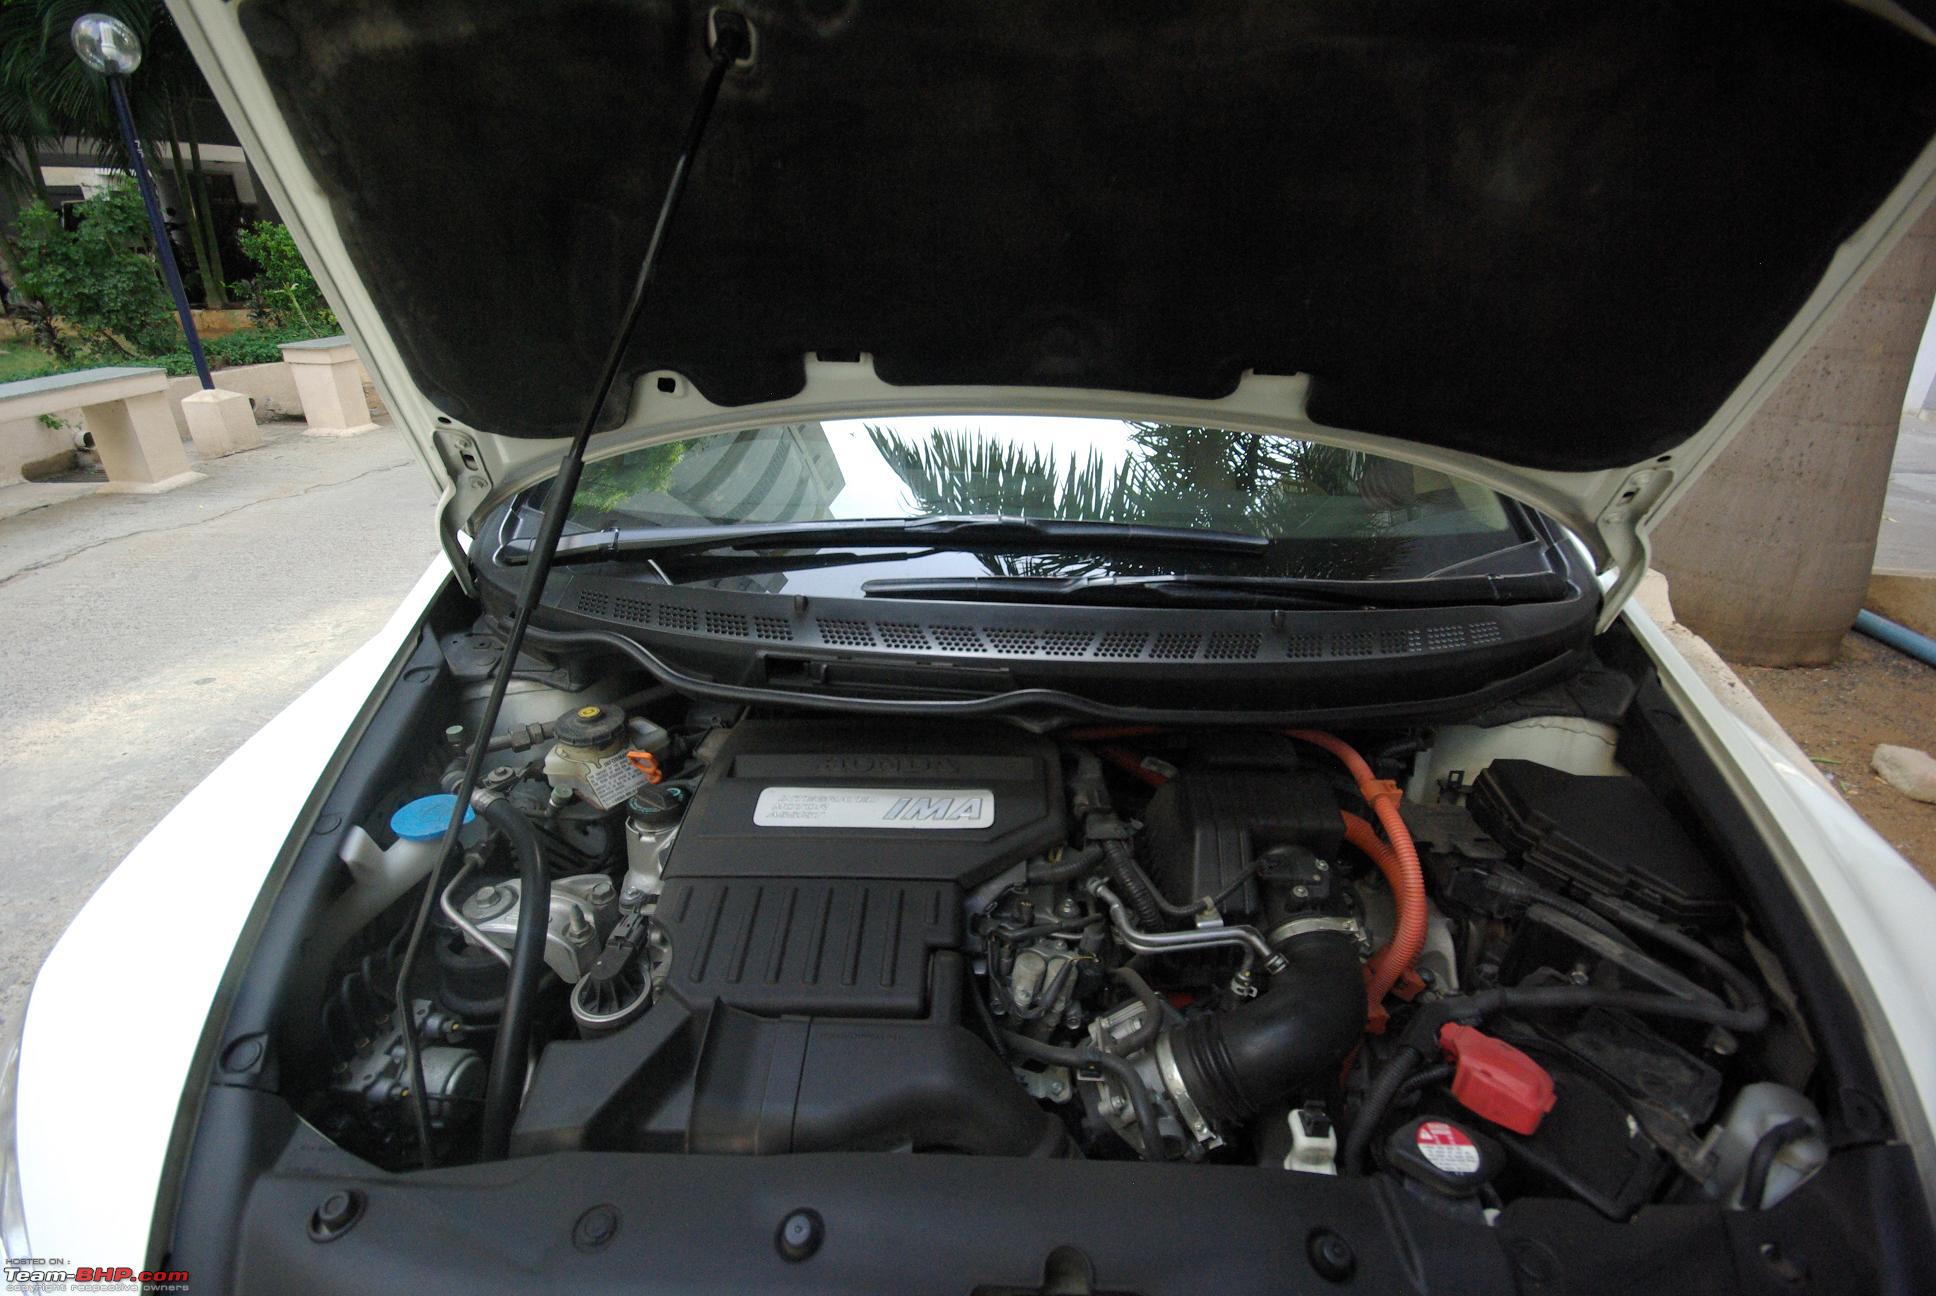 battery system”) in the model years 2006- 2008 Honda Civic Hybrids 